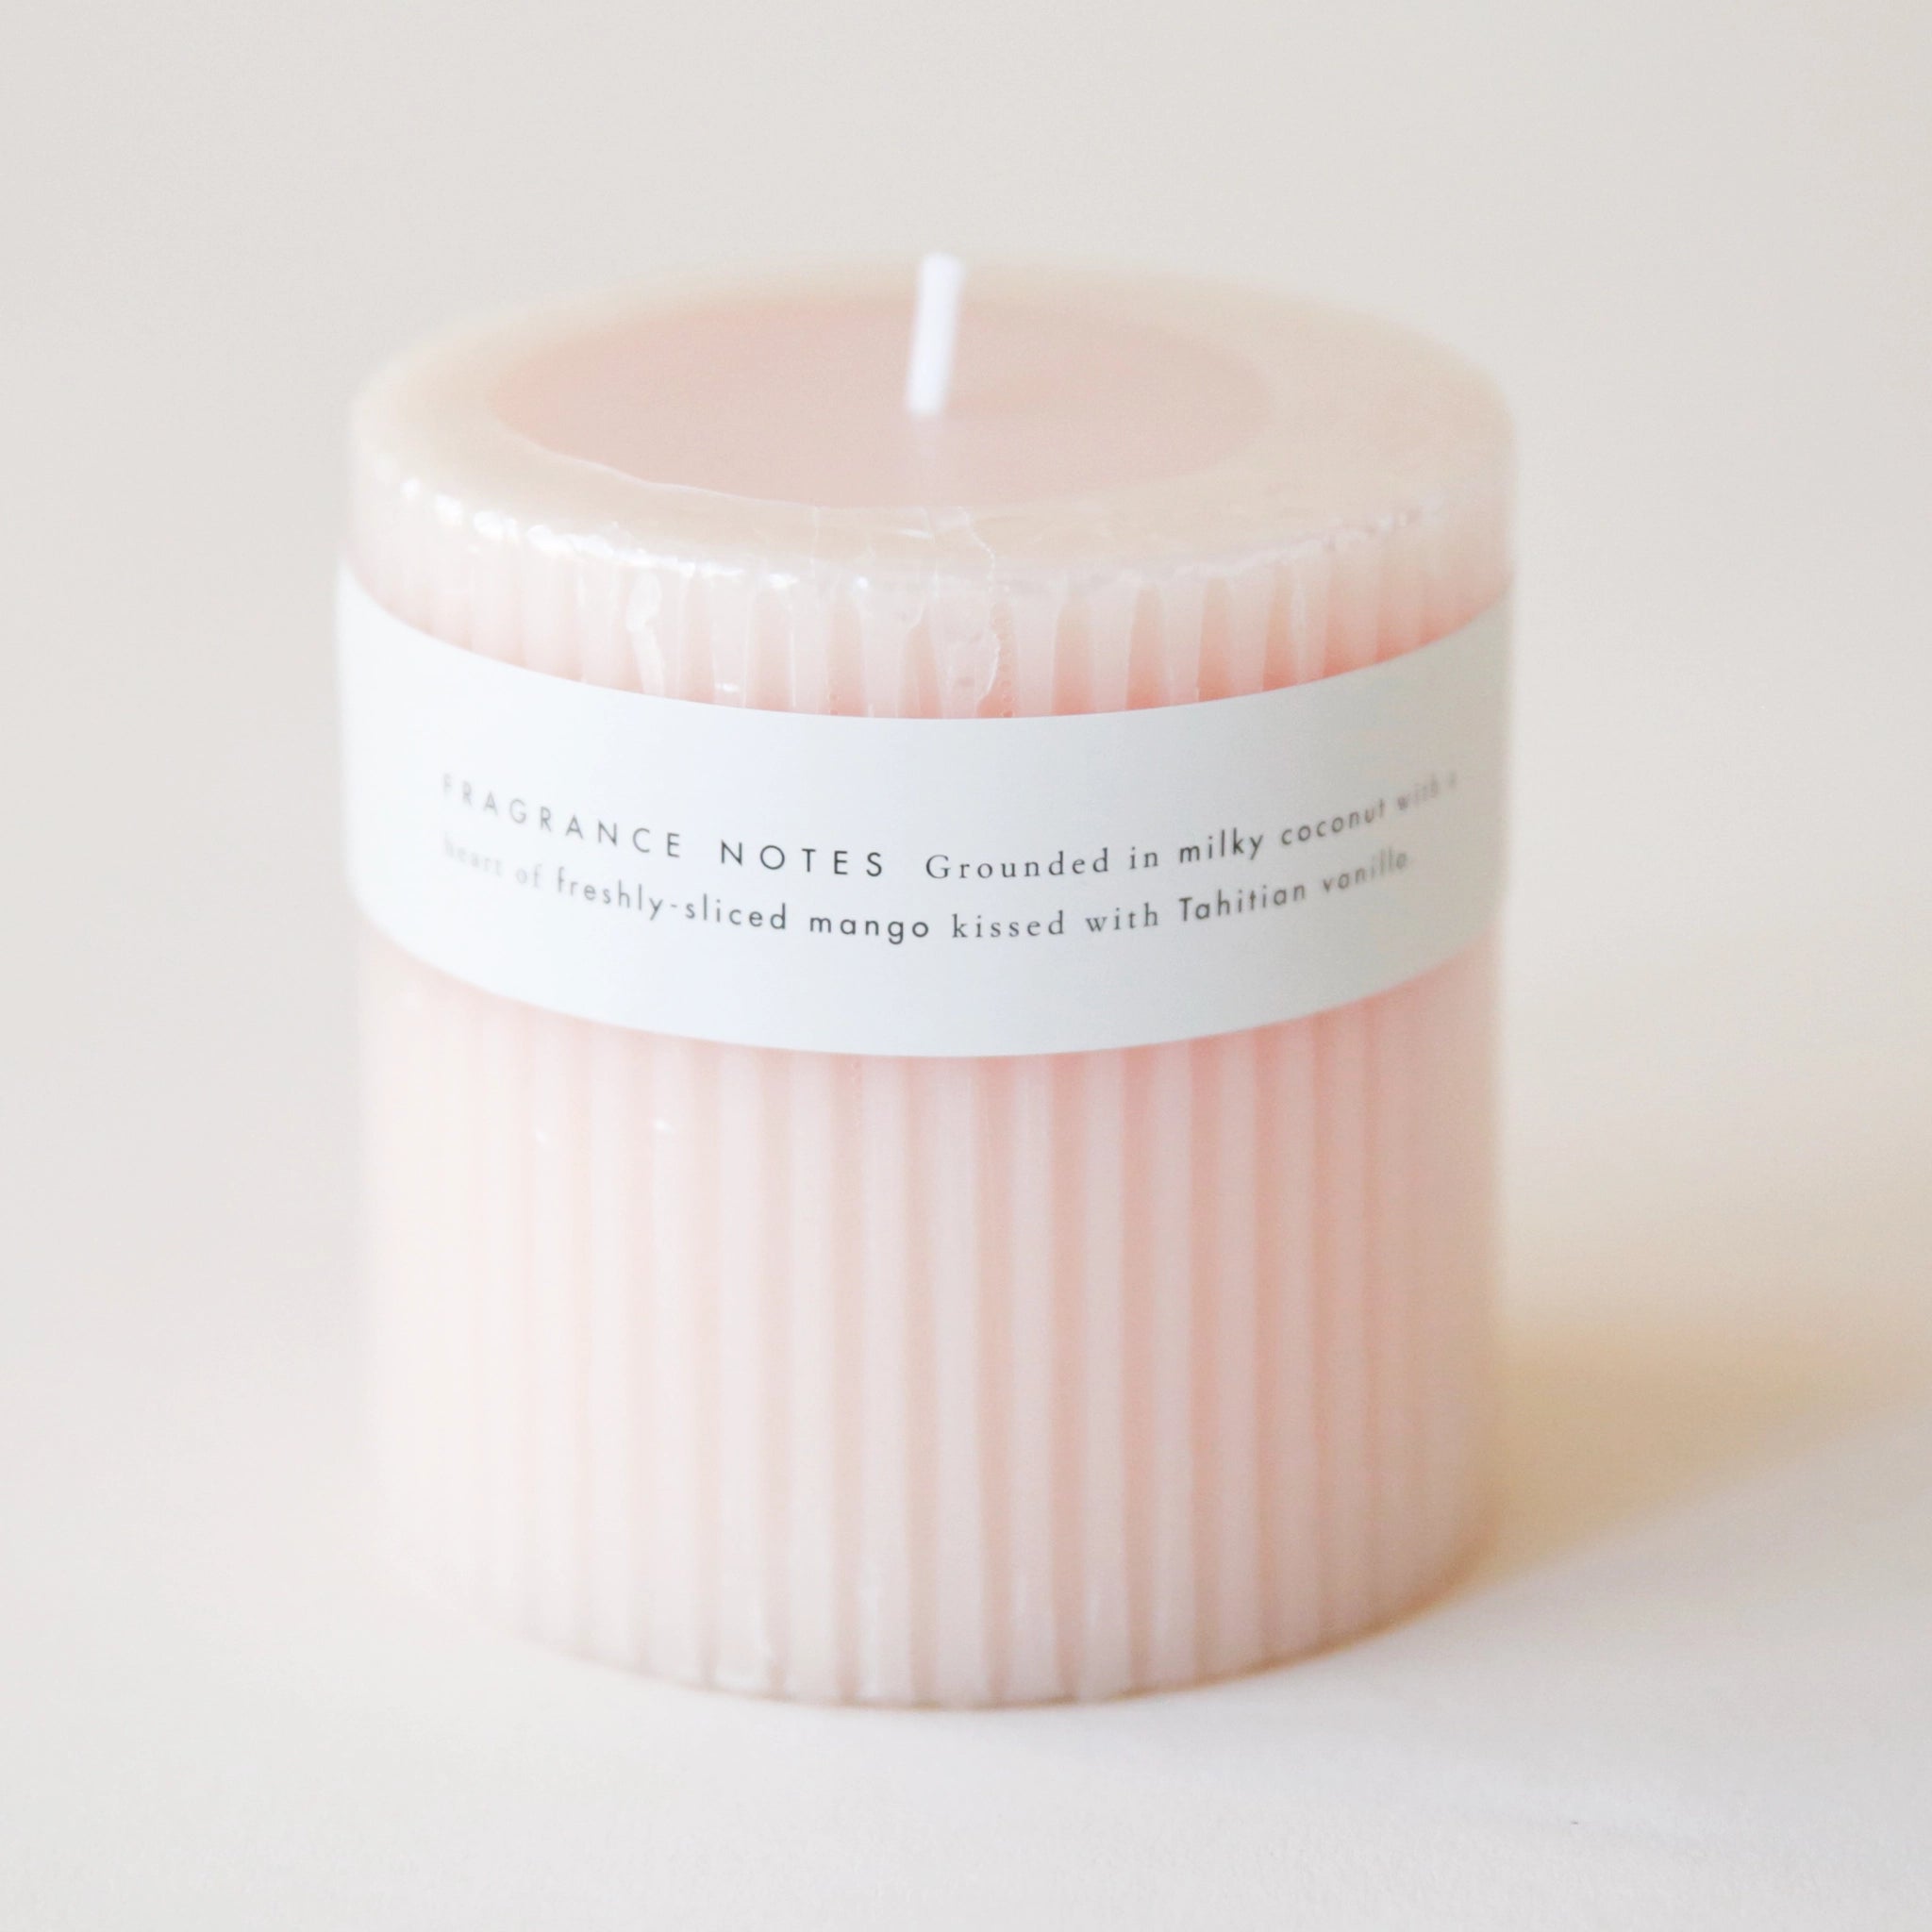 A light pink pilar candle with a ribbed detail and a thin white label wrapped around that reads, "Coconut Milk Mango Scented Candle".